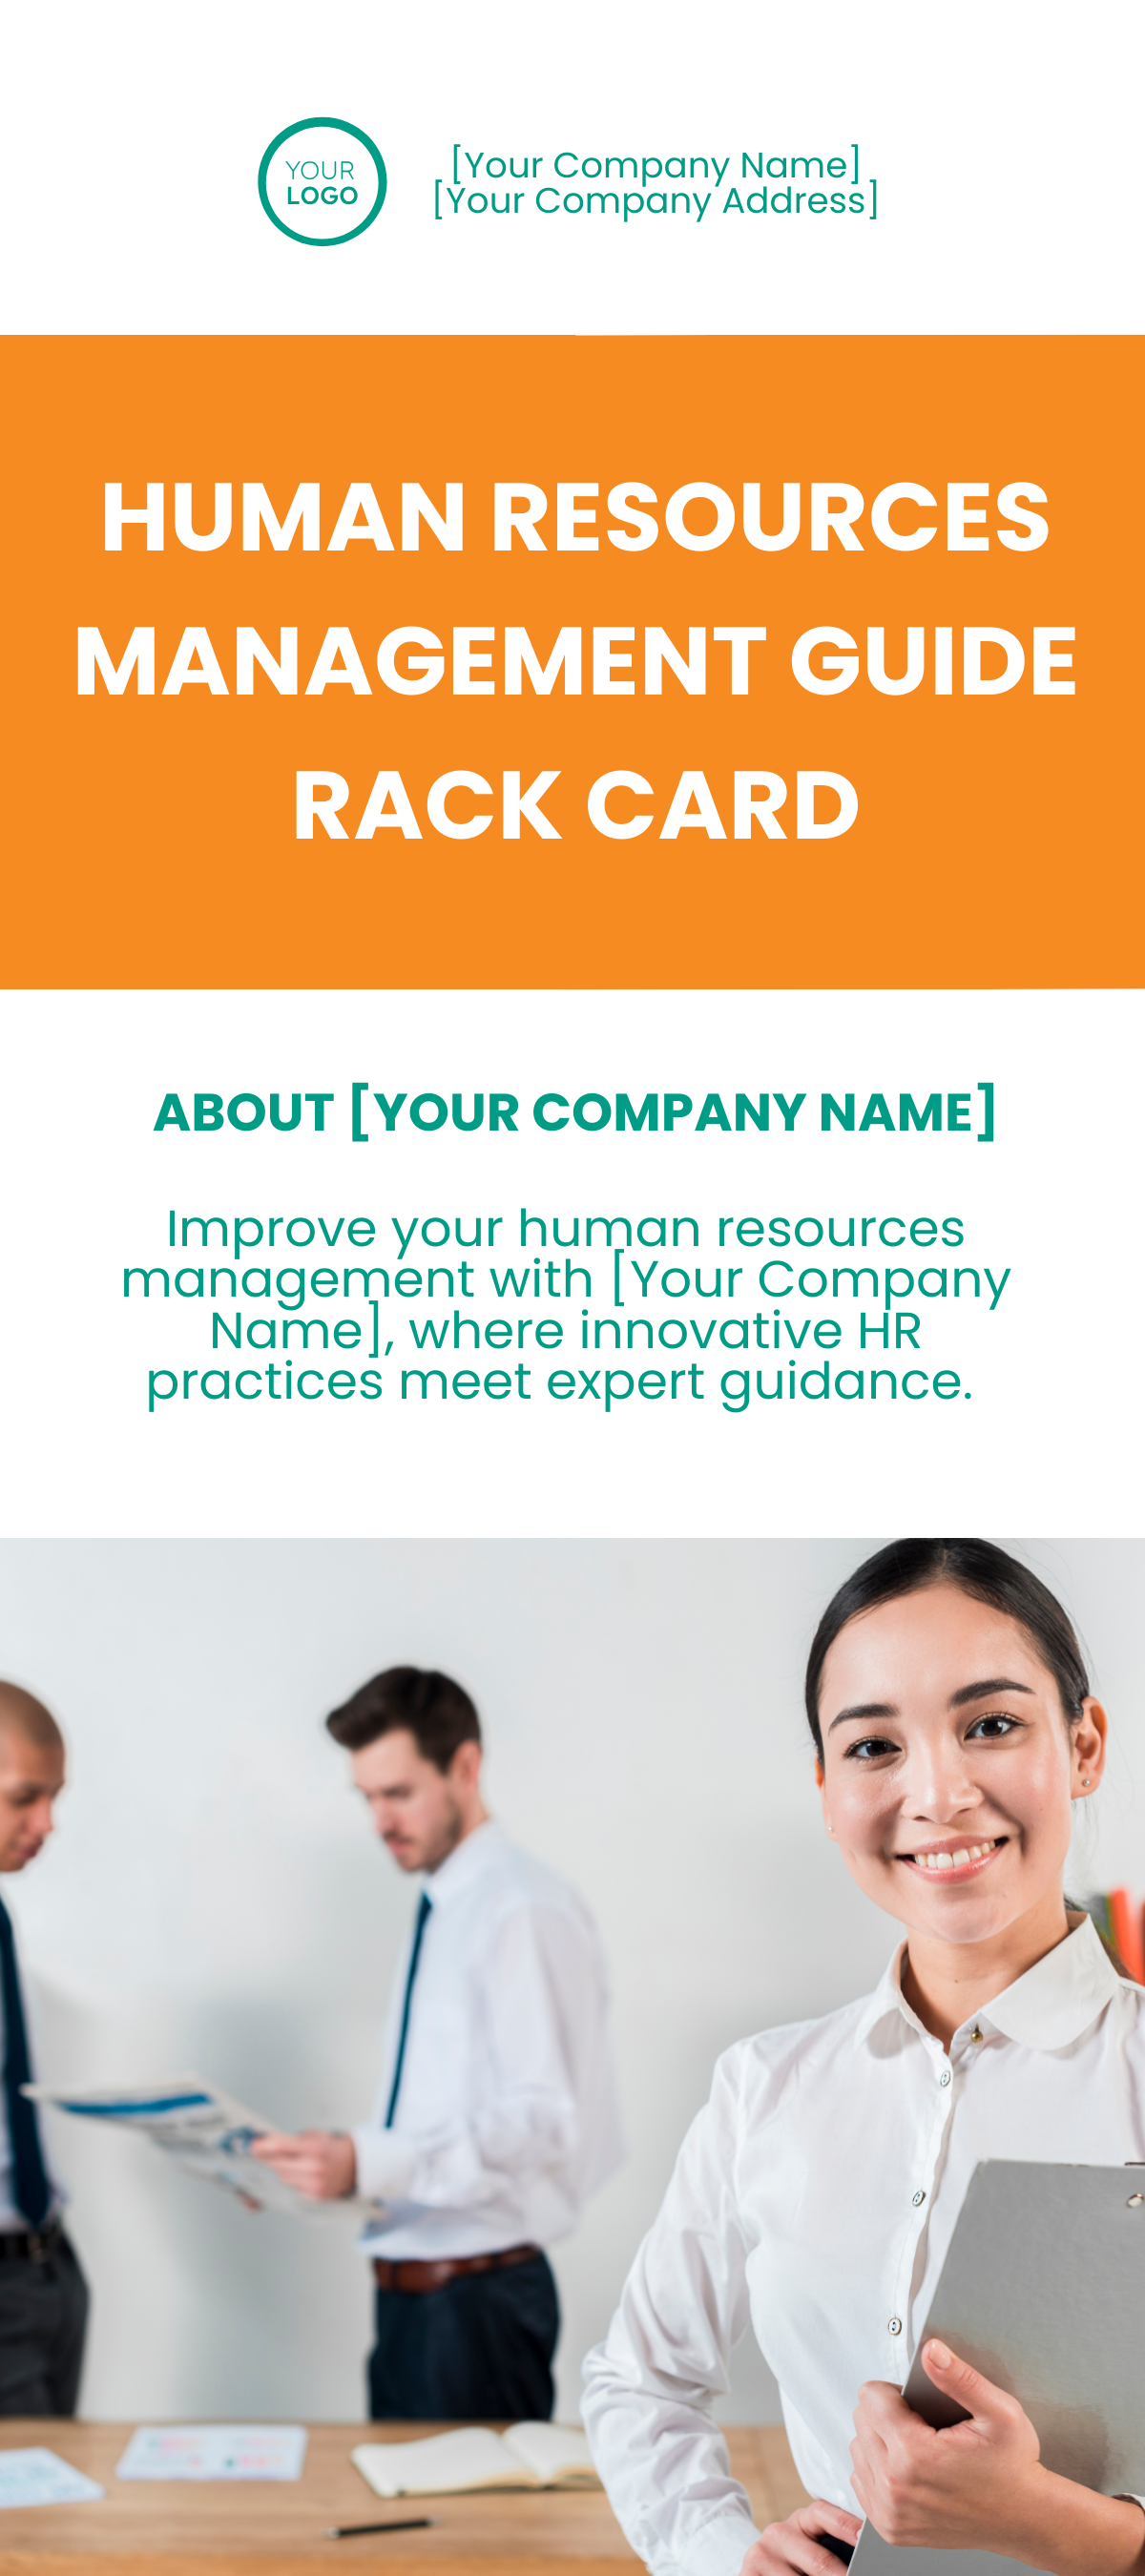 Human Resources Management Guide Rack Card Template